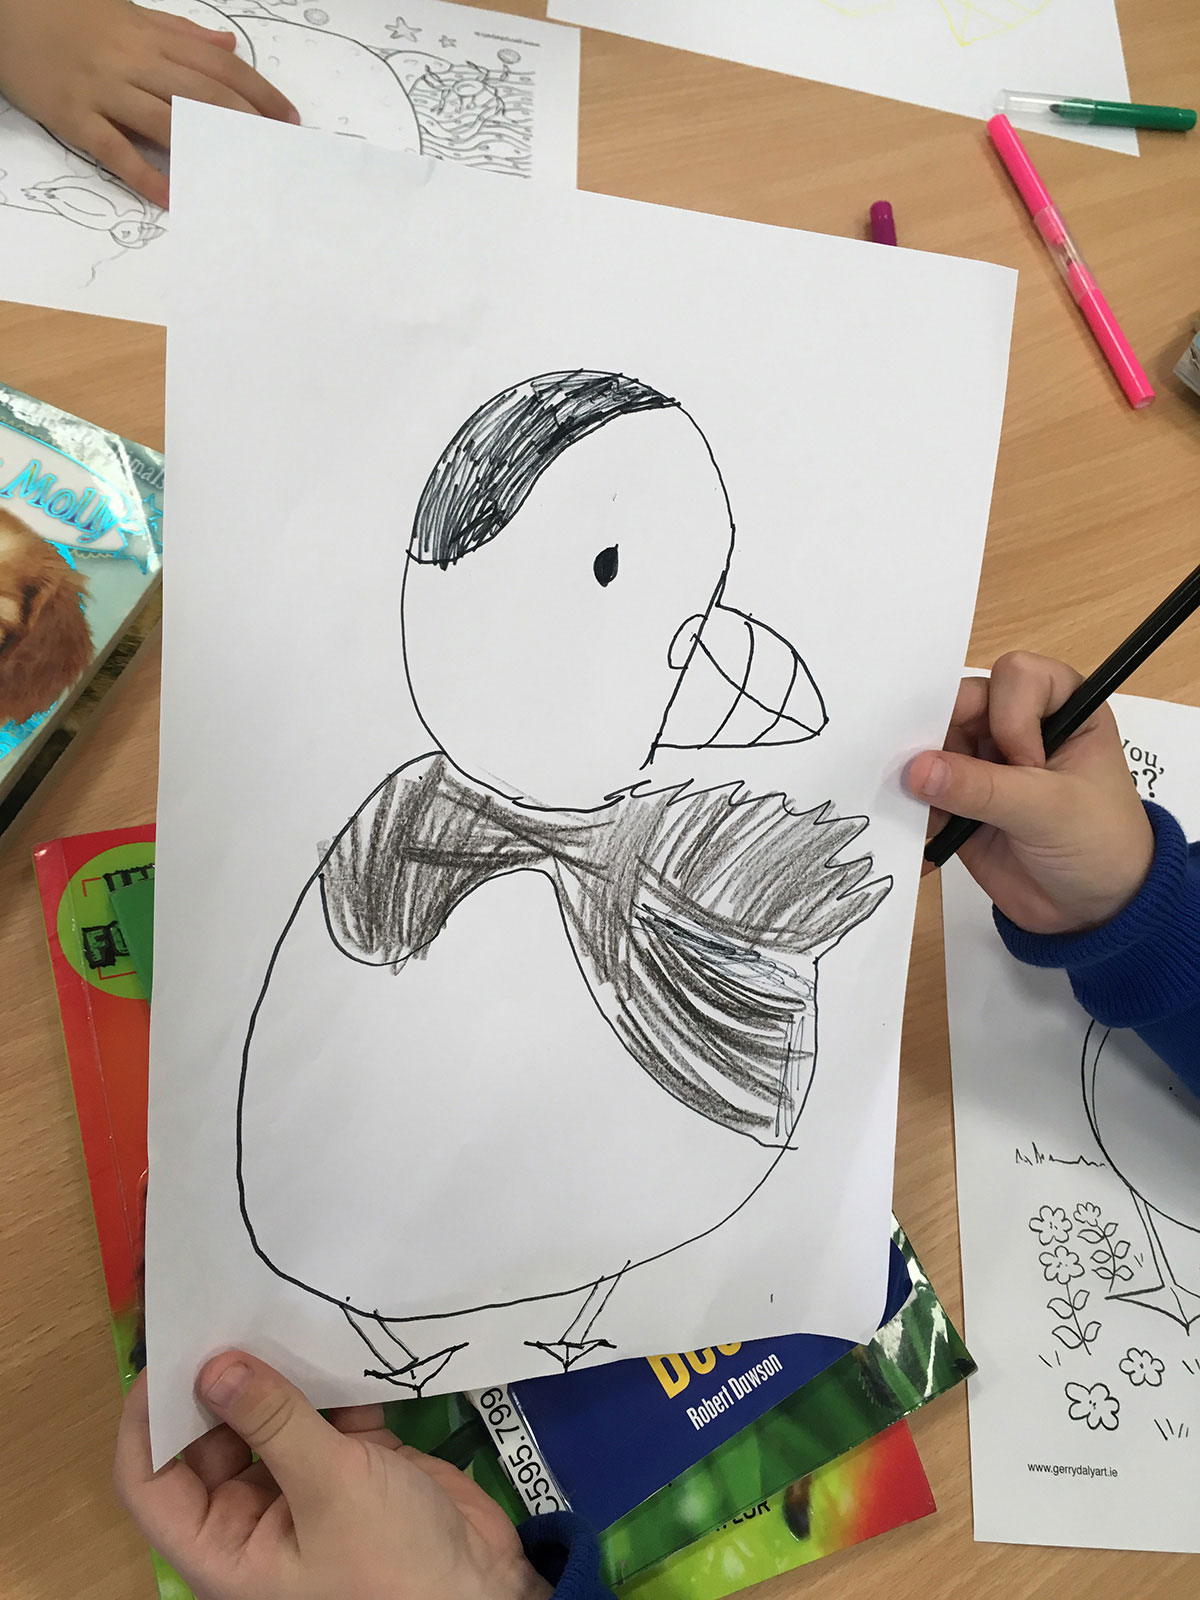 Child's drawing of a Puffin